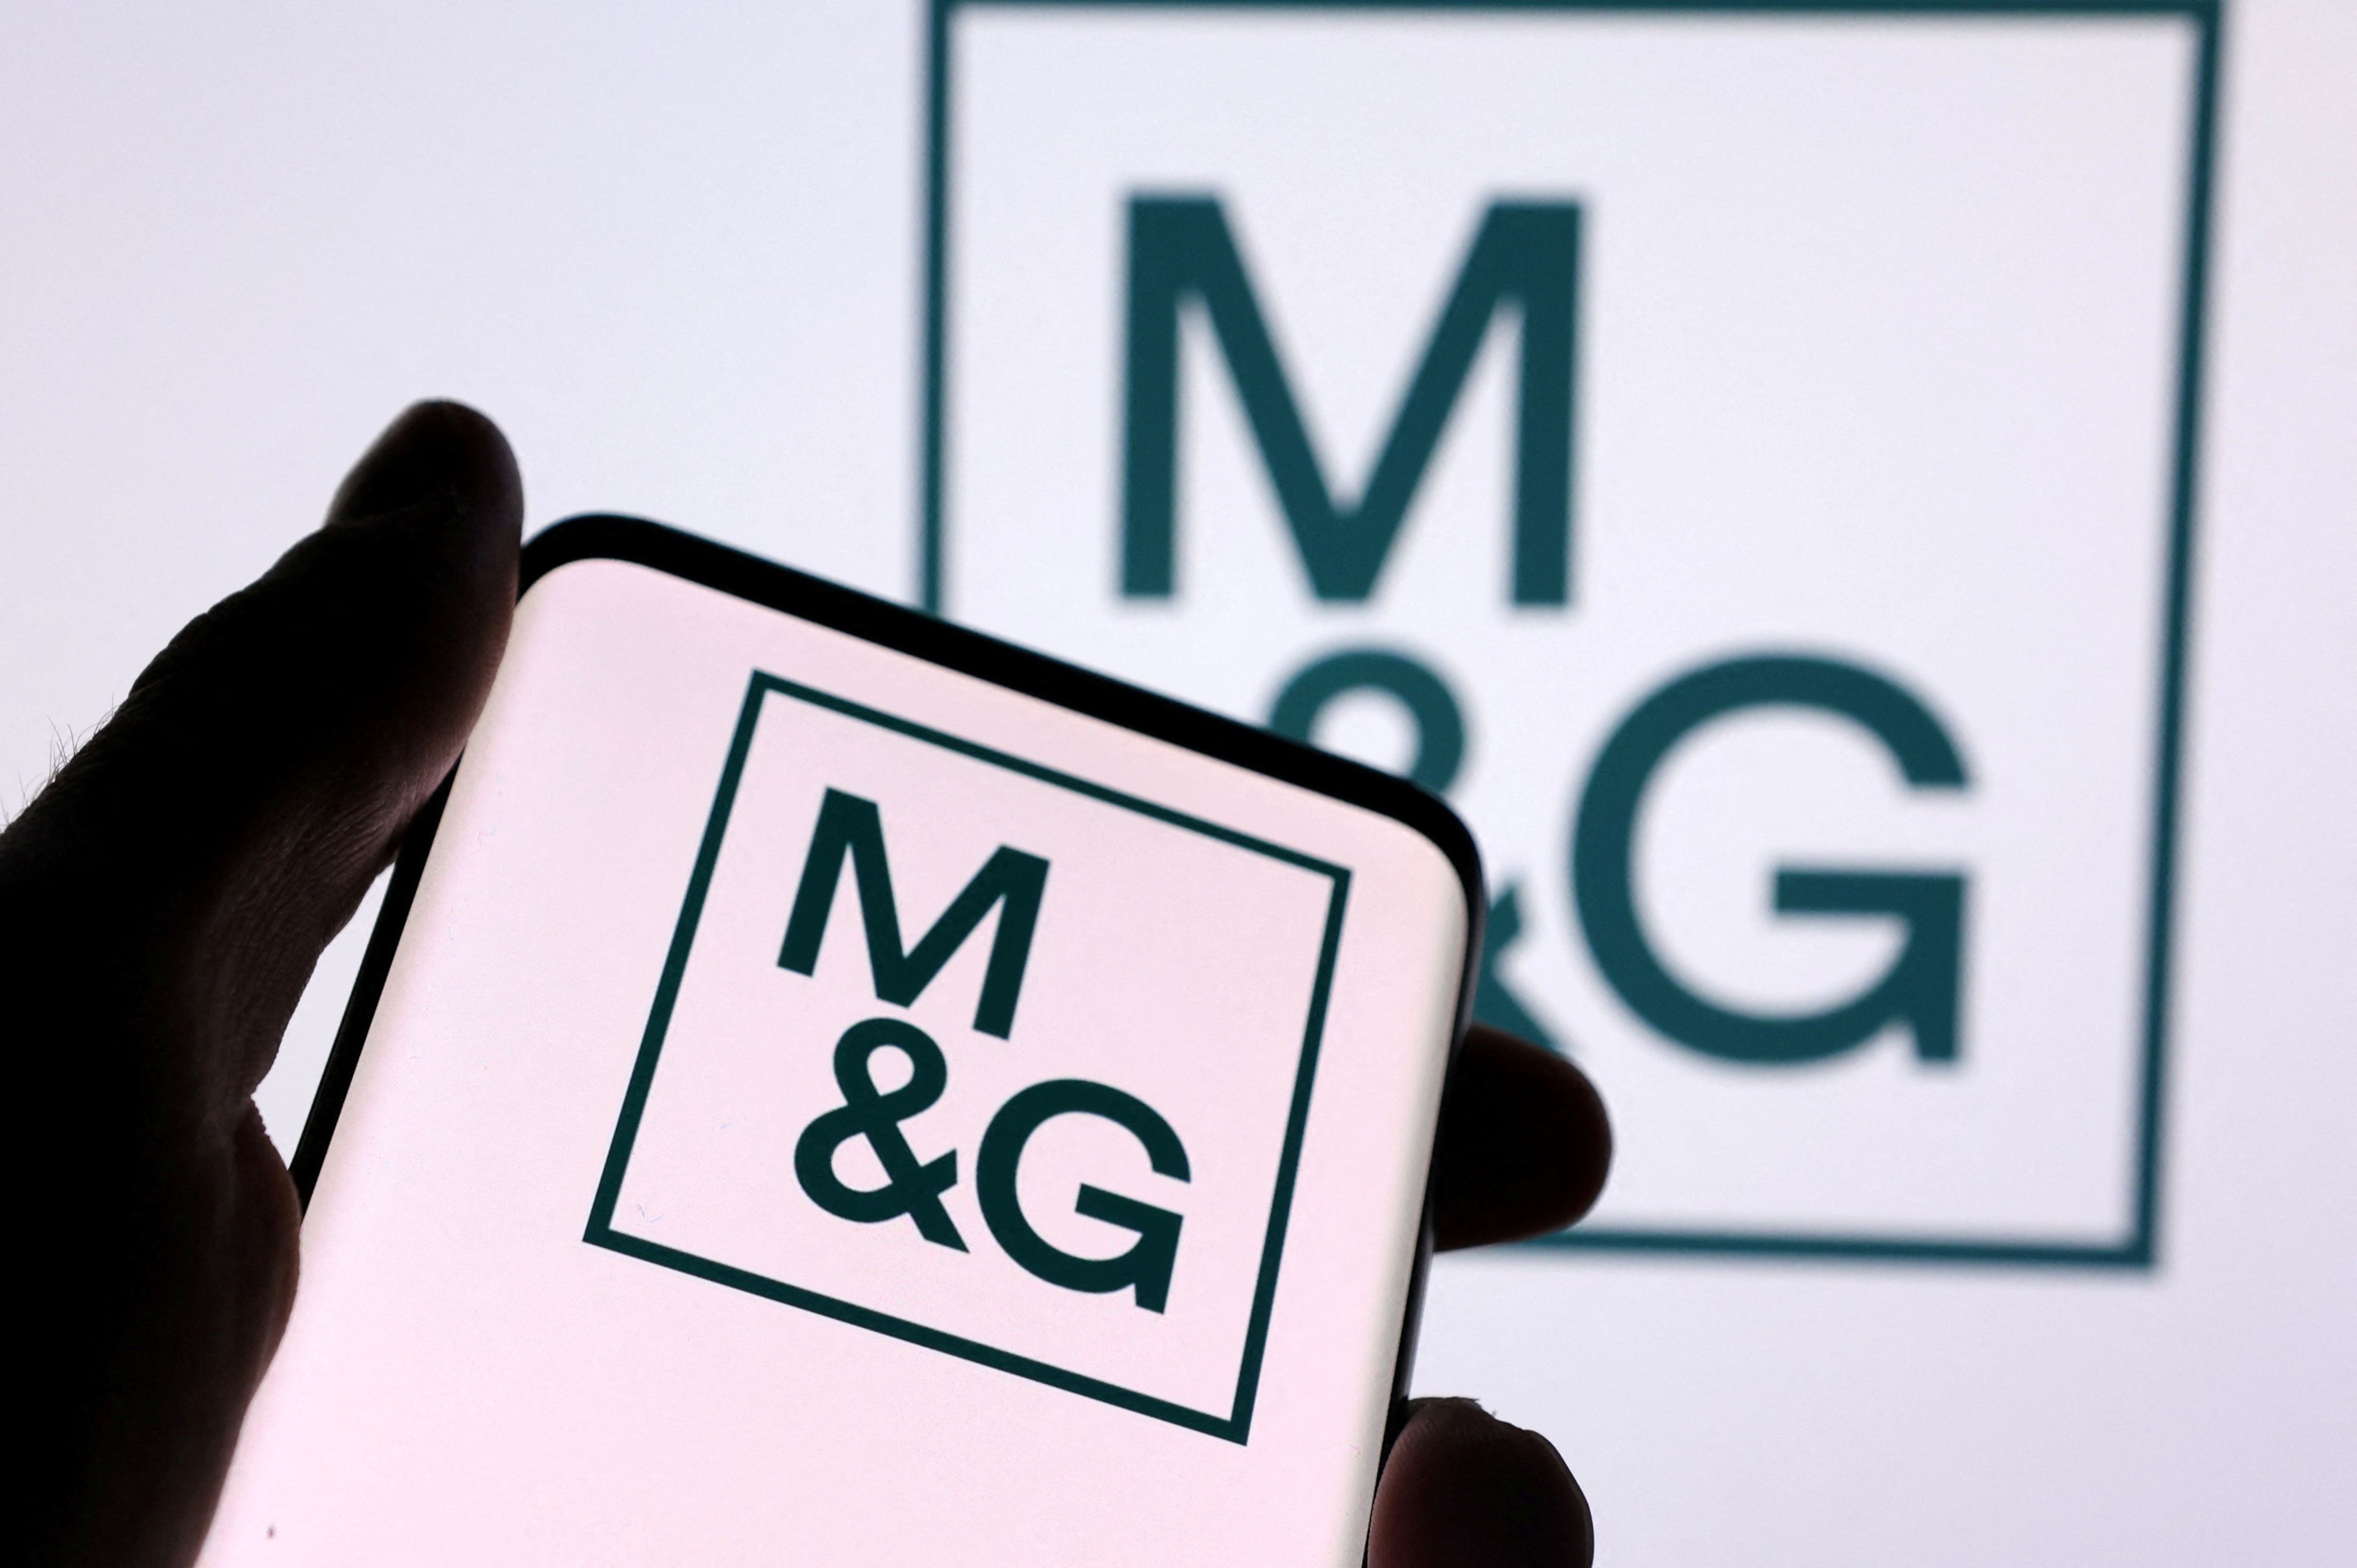 Illustration shows a smartphone with displayed M&G plc logo